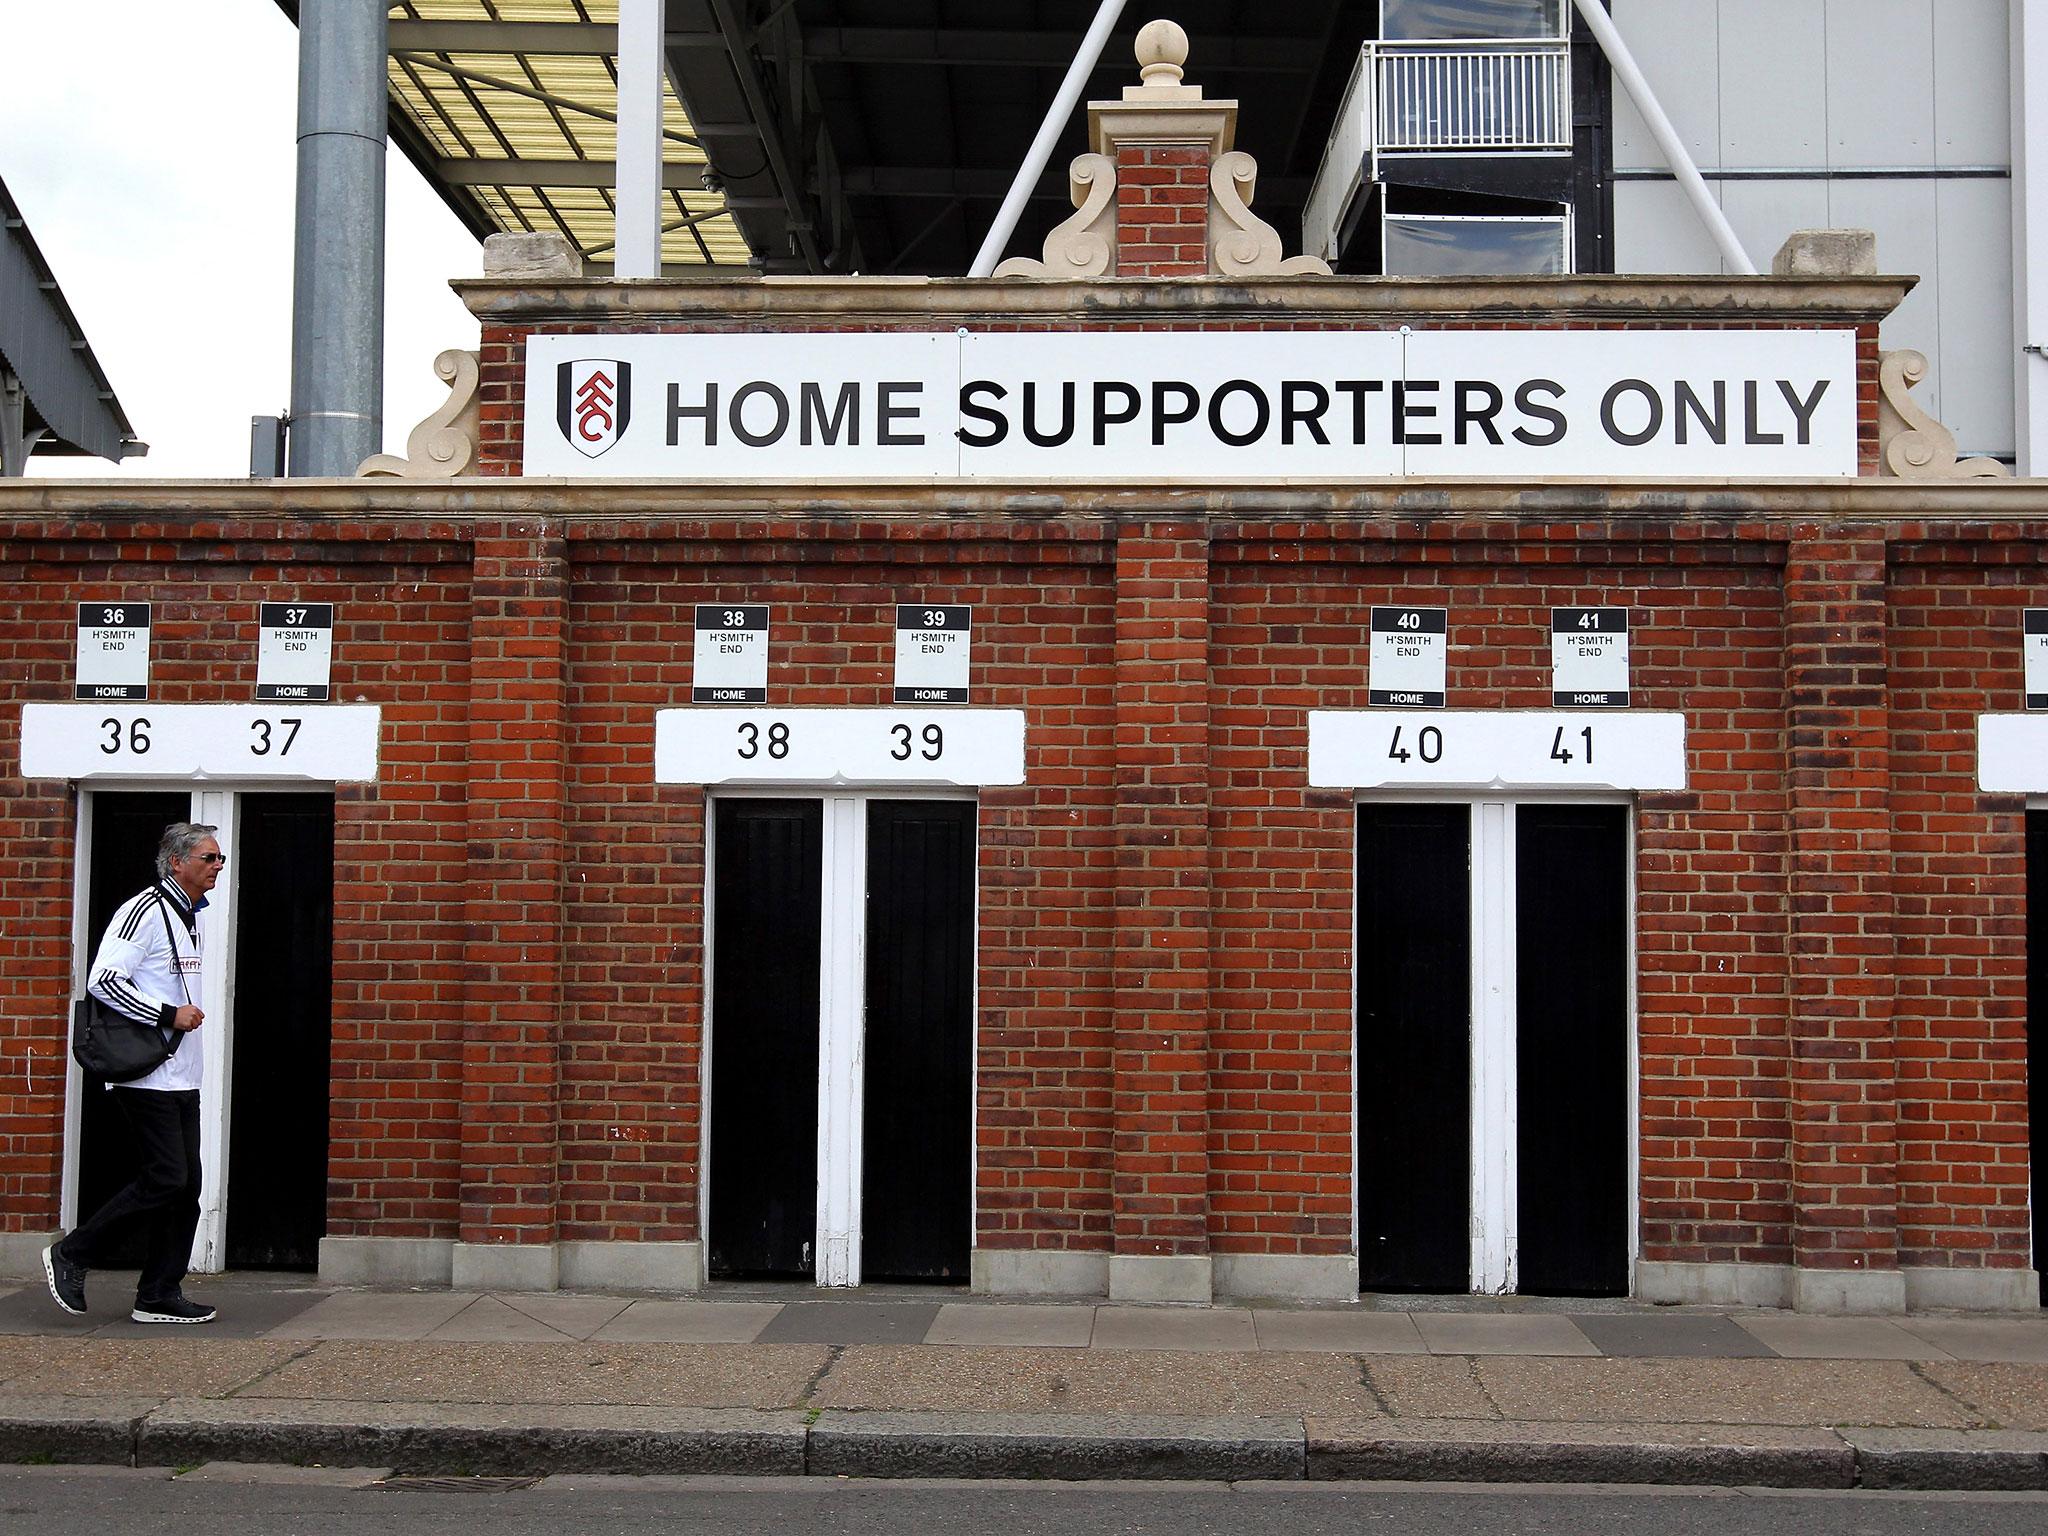 Craven Cottage, home to promotion contenders Fulham FC